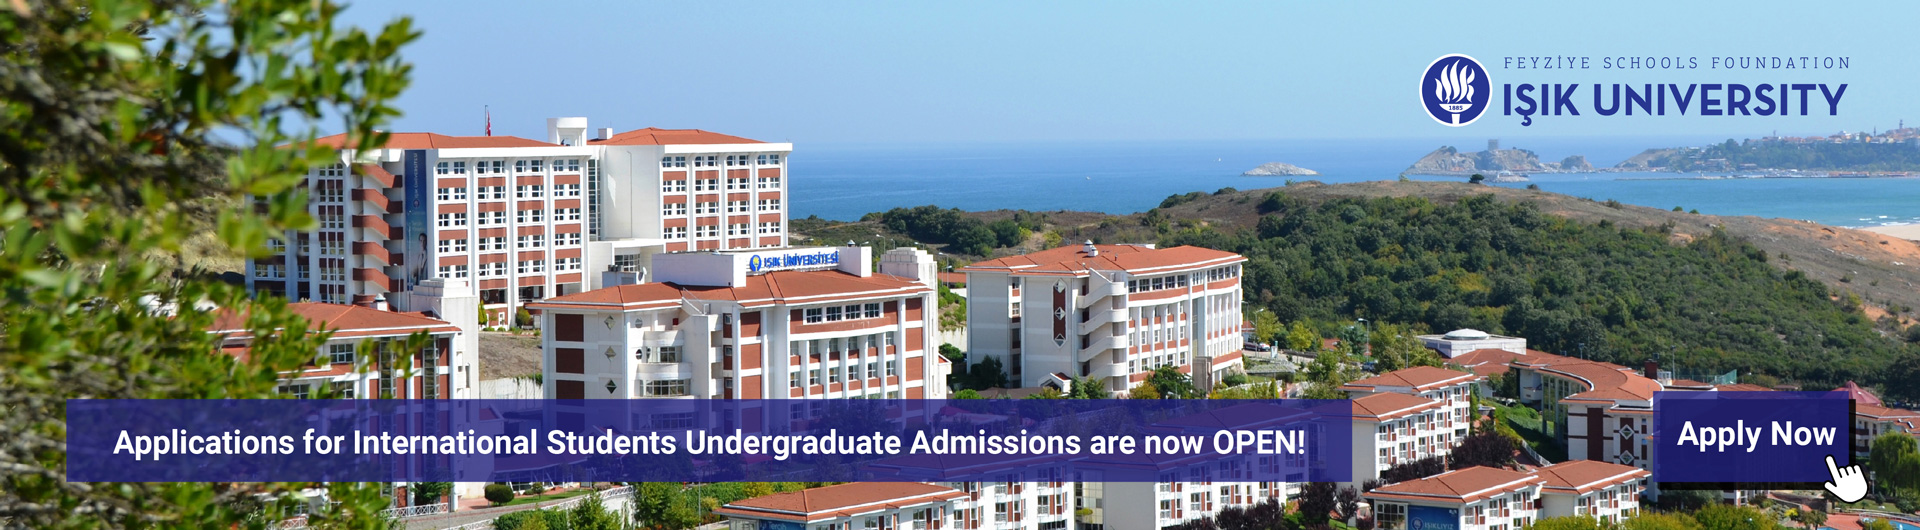 Applications for International Students Undergraduate Admissions are now OPEN!